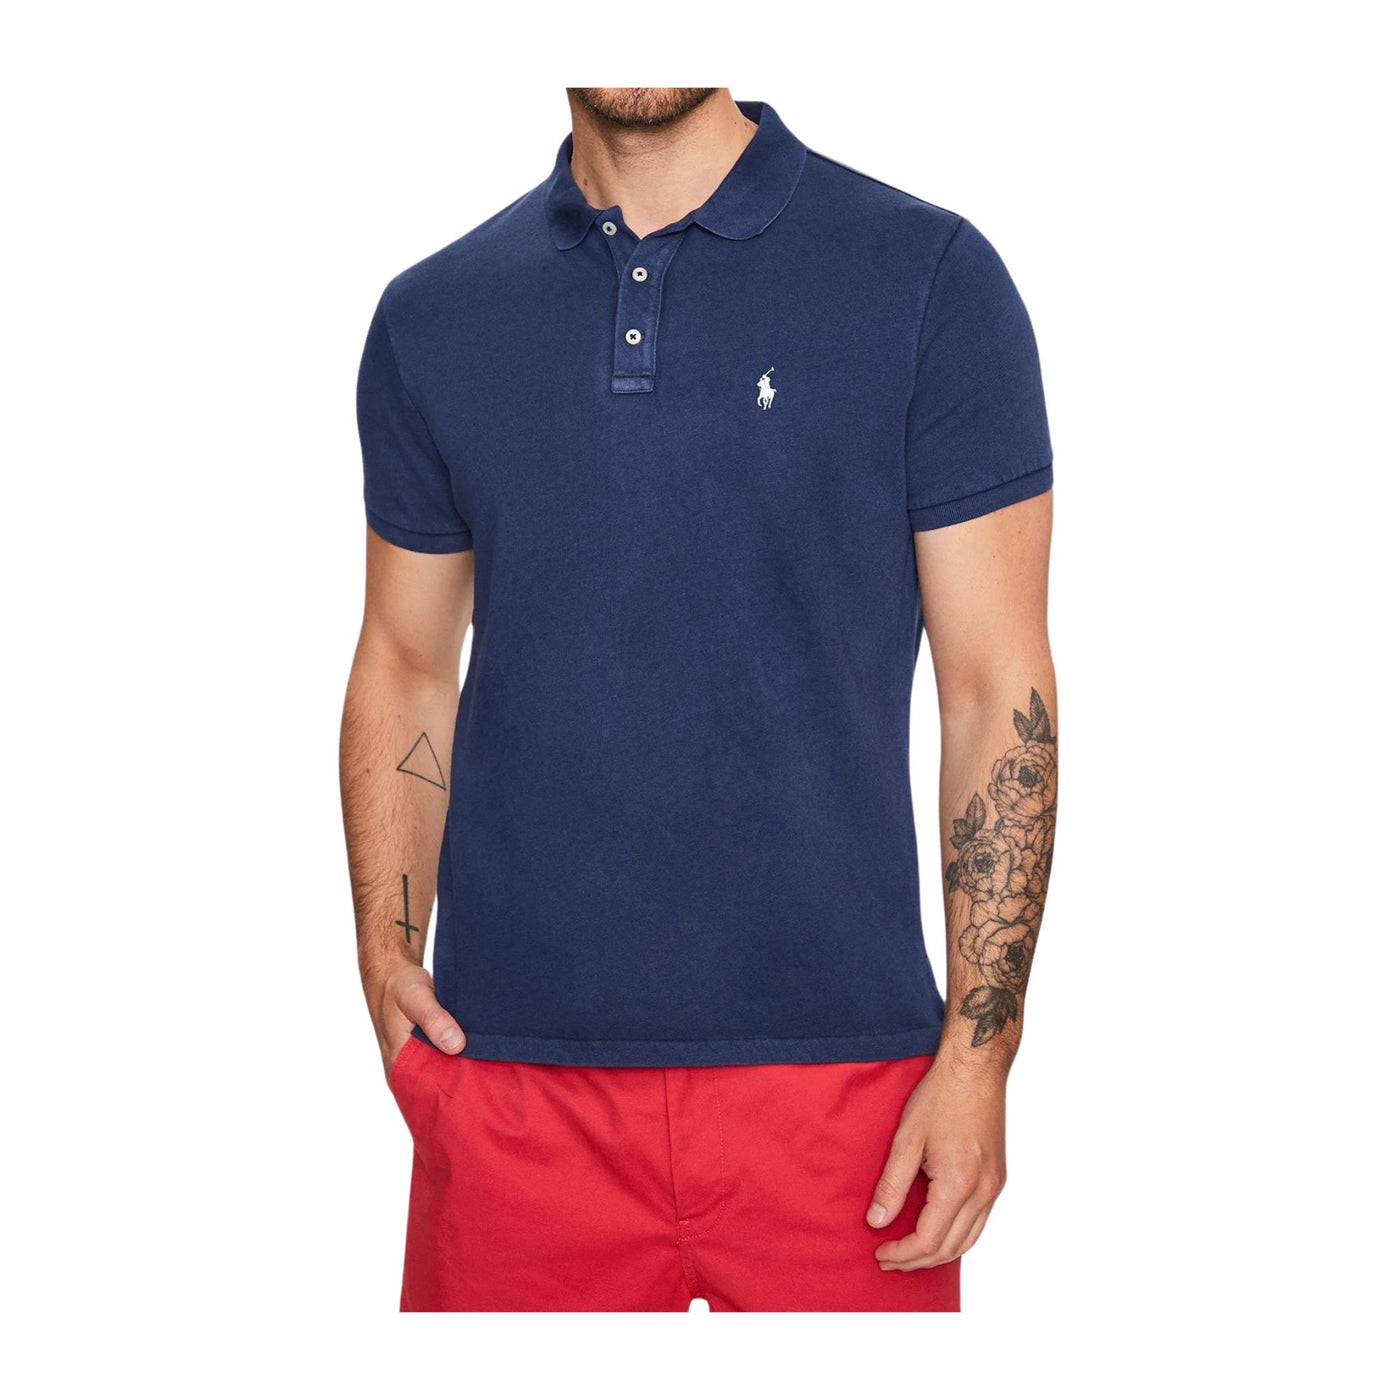 Blue men's polo shirt with three buttons